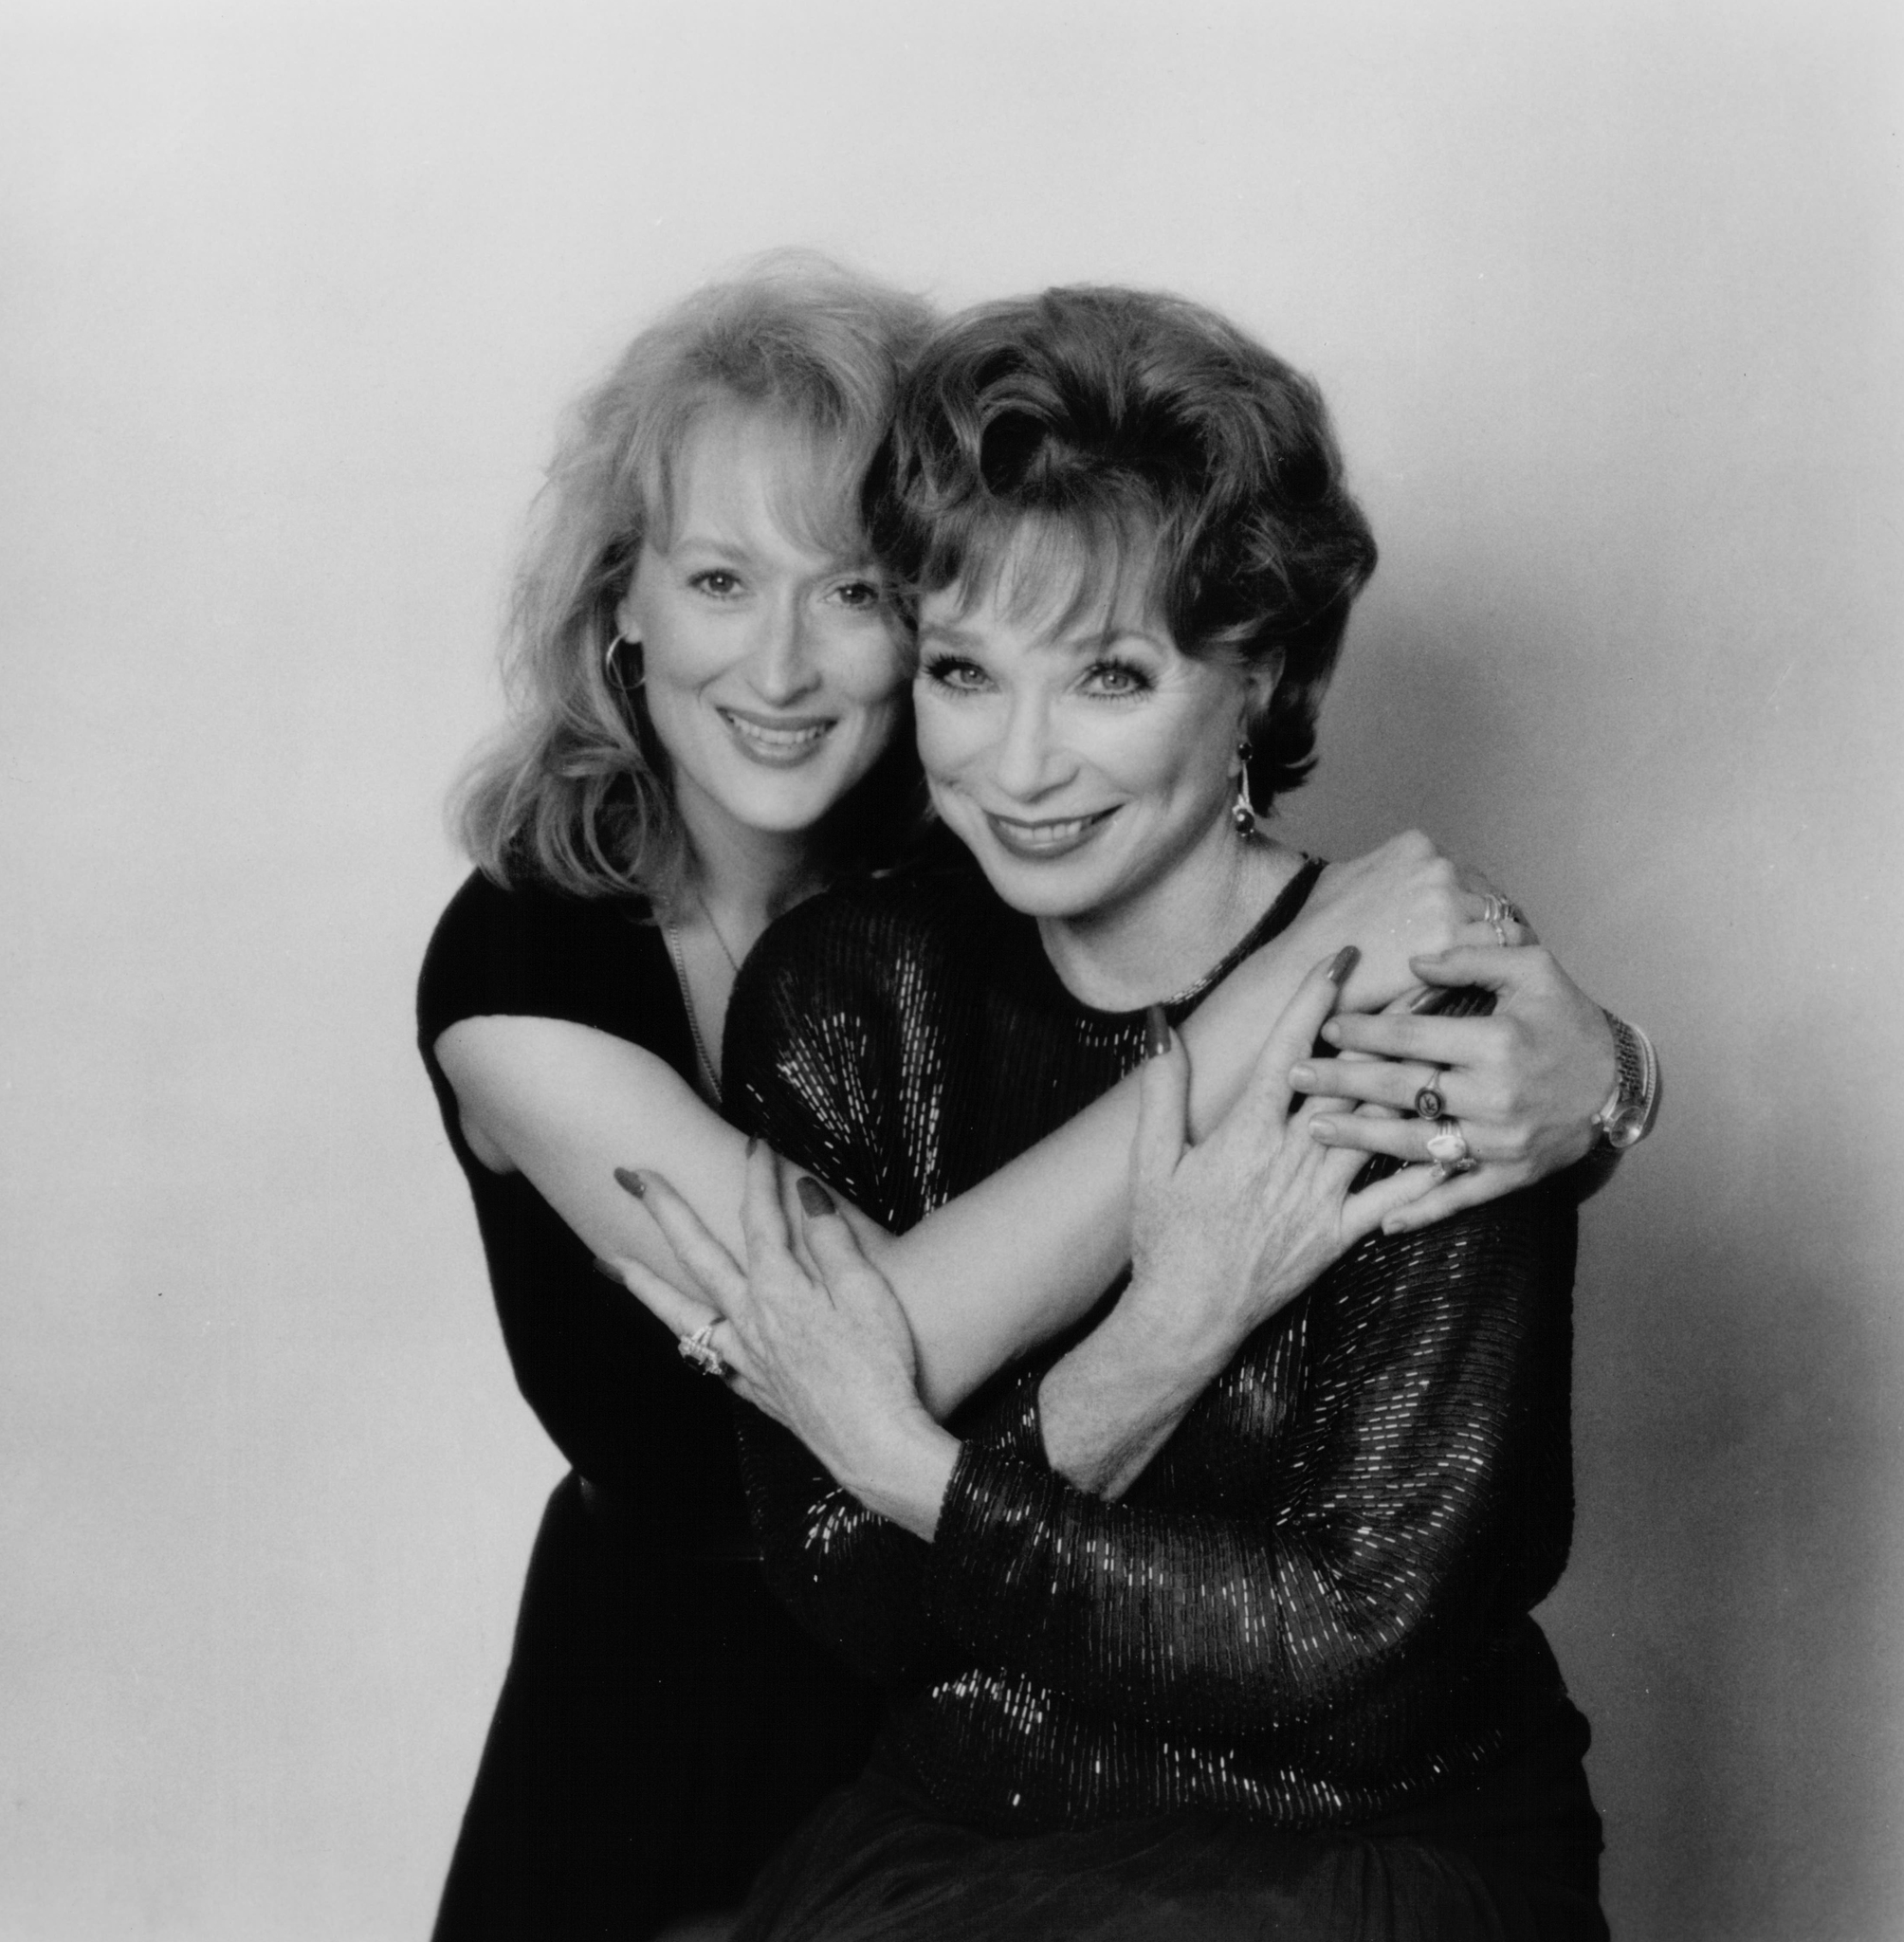 Still of Shirley MacLaine and Meryl Streep in Postcards from the Edge (1990)